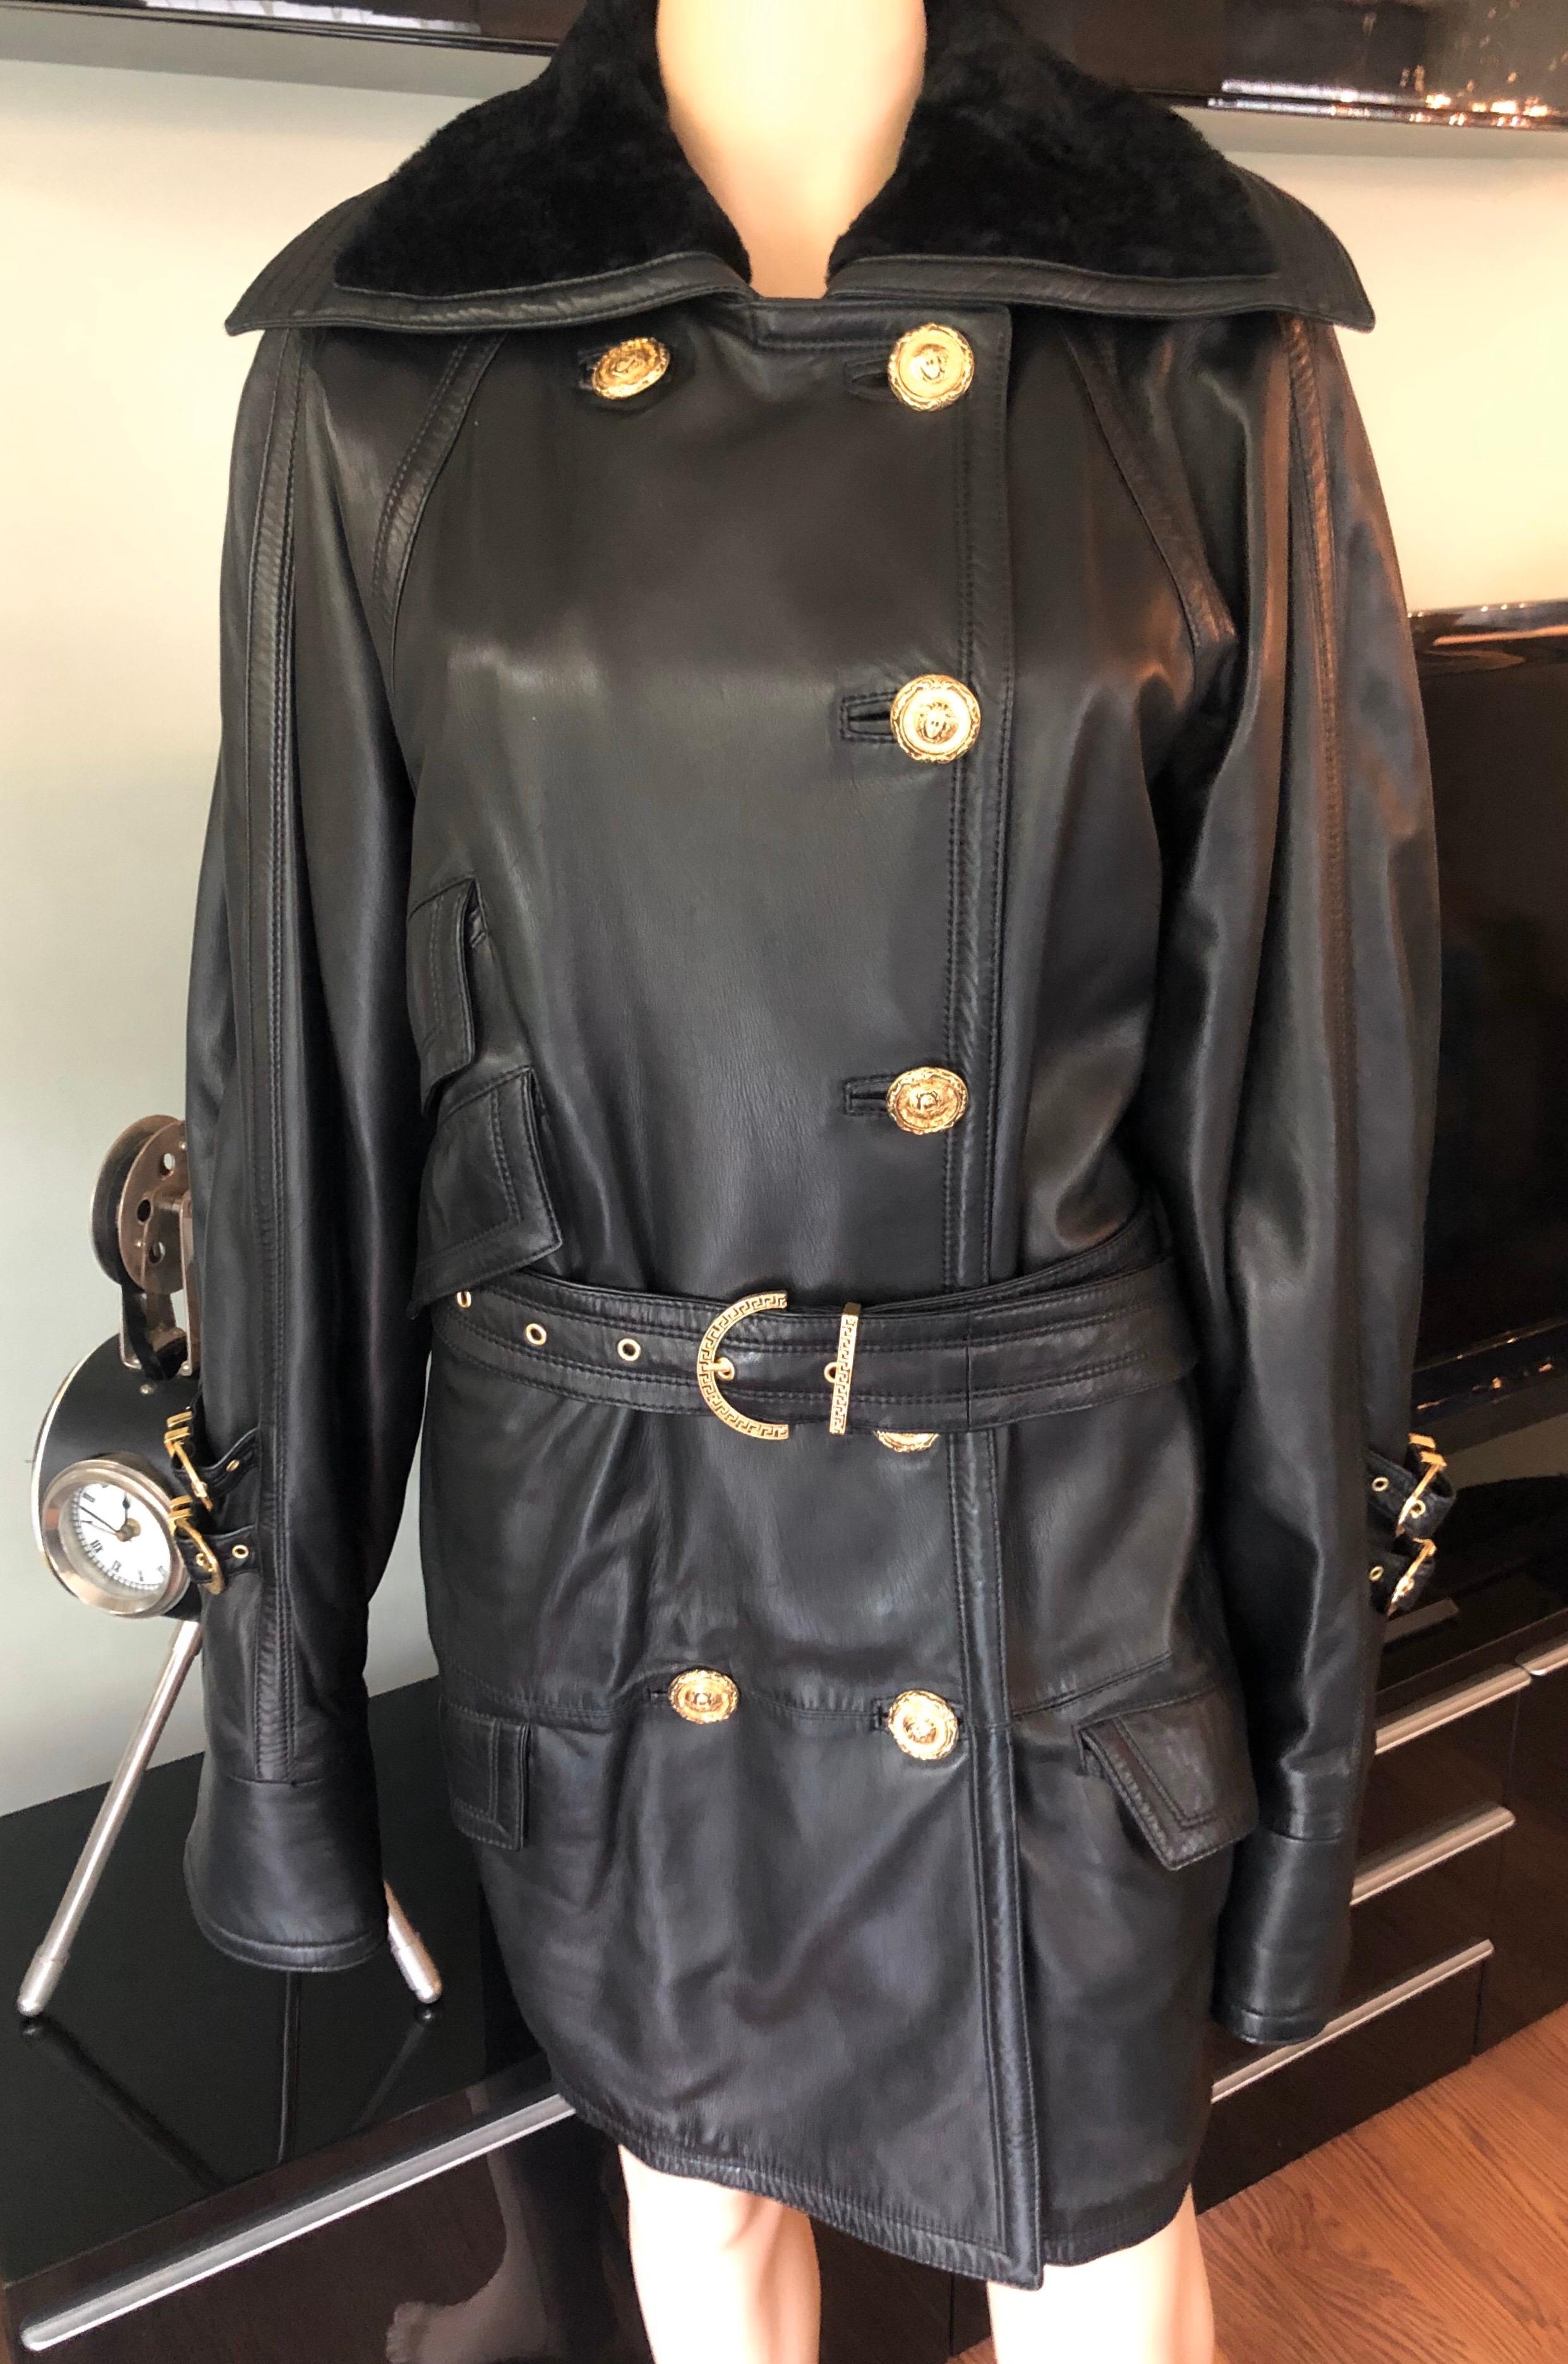 Gianni Versace c. 1990 Bondage Leather Belted Knee-Length Black Jacket Coat In Good Condition For Sale In Naples, FL